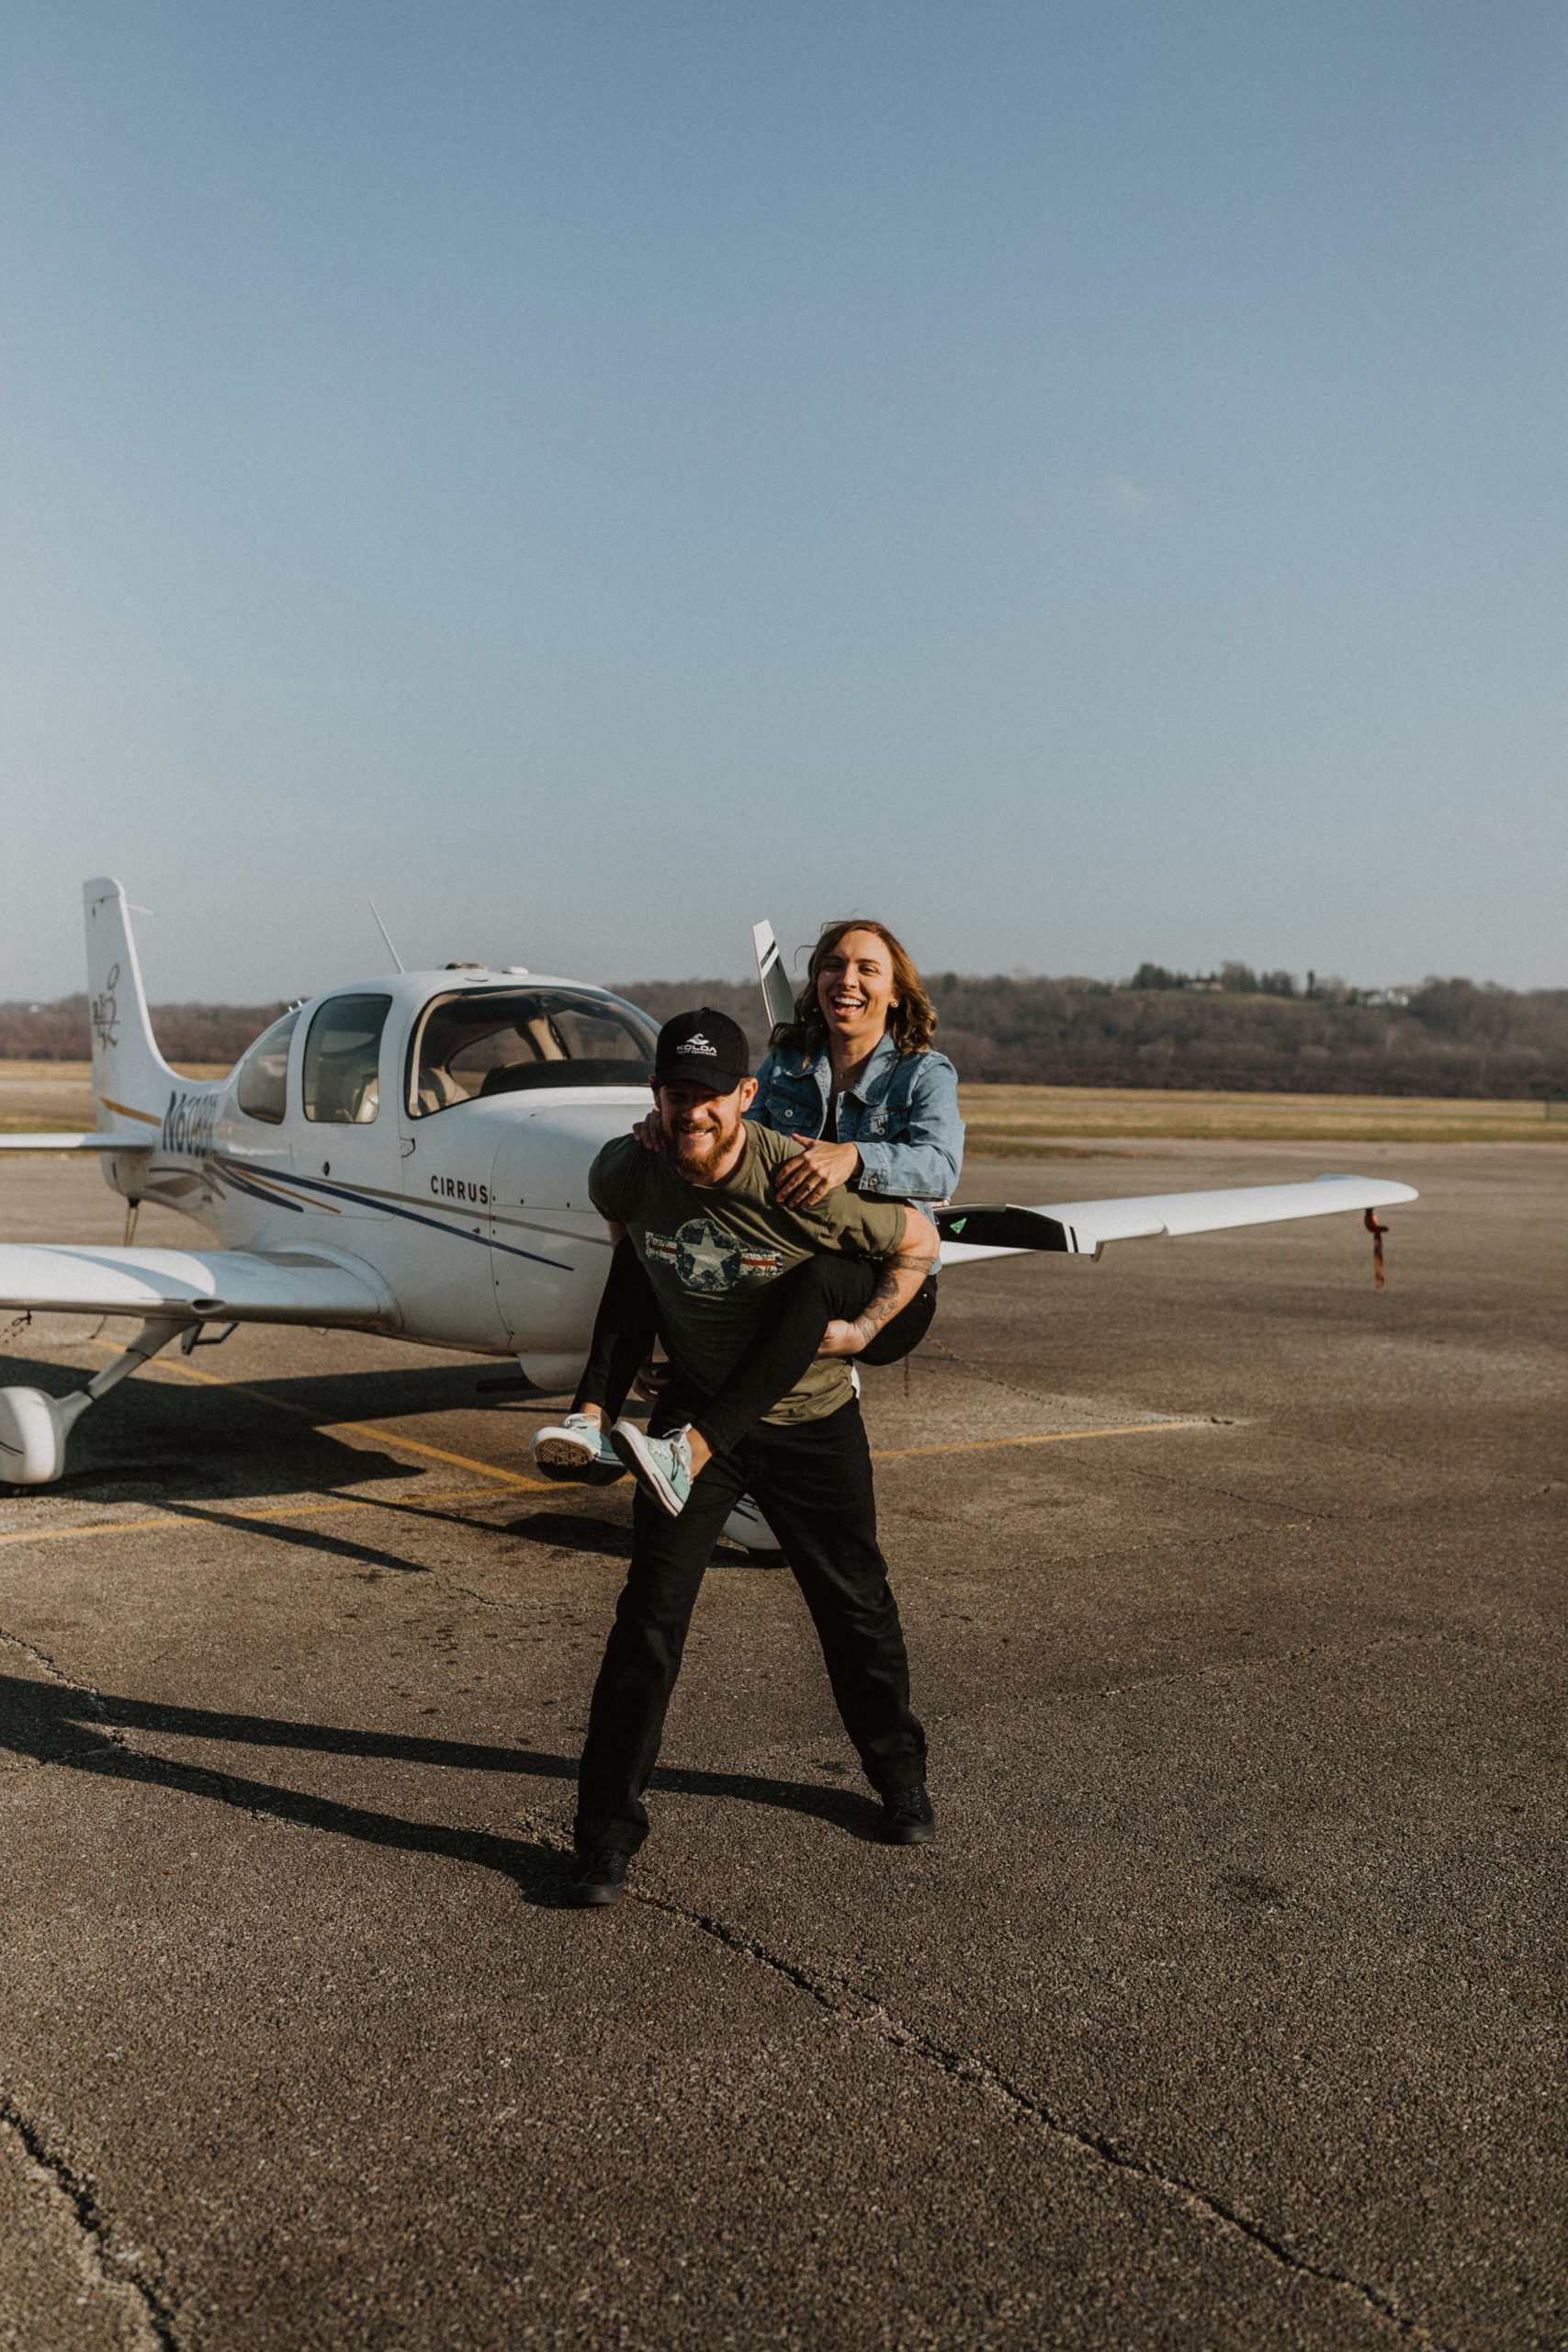 Engaged Couples Airplane Engagement Session at Lunken Airport in Cincinnati